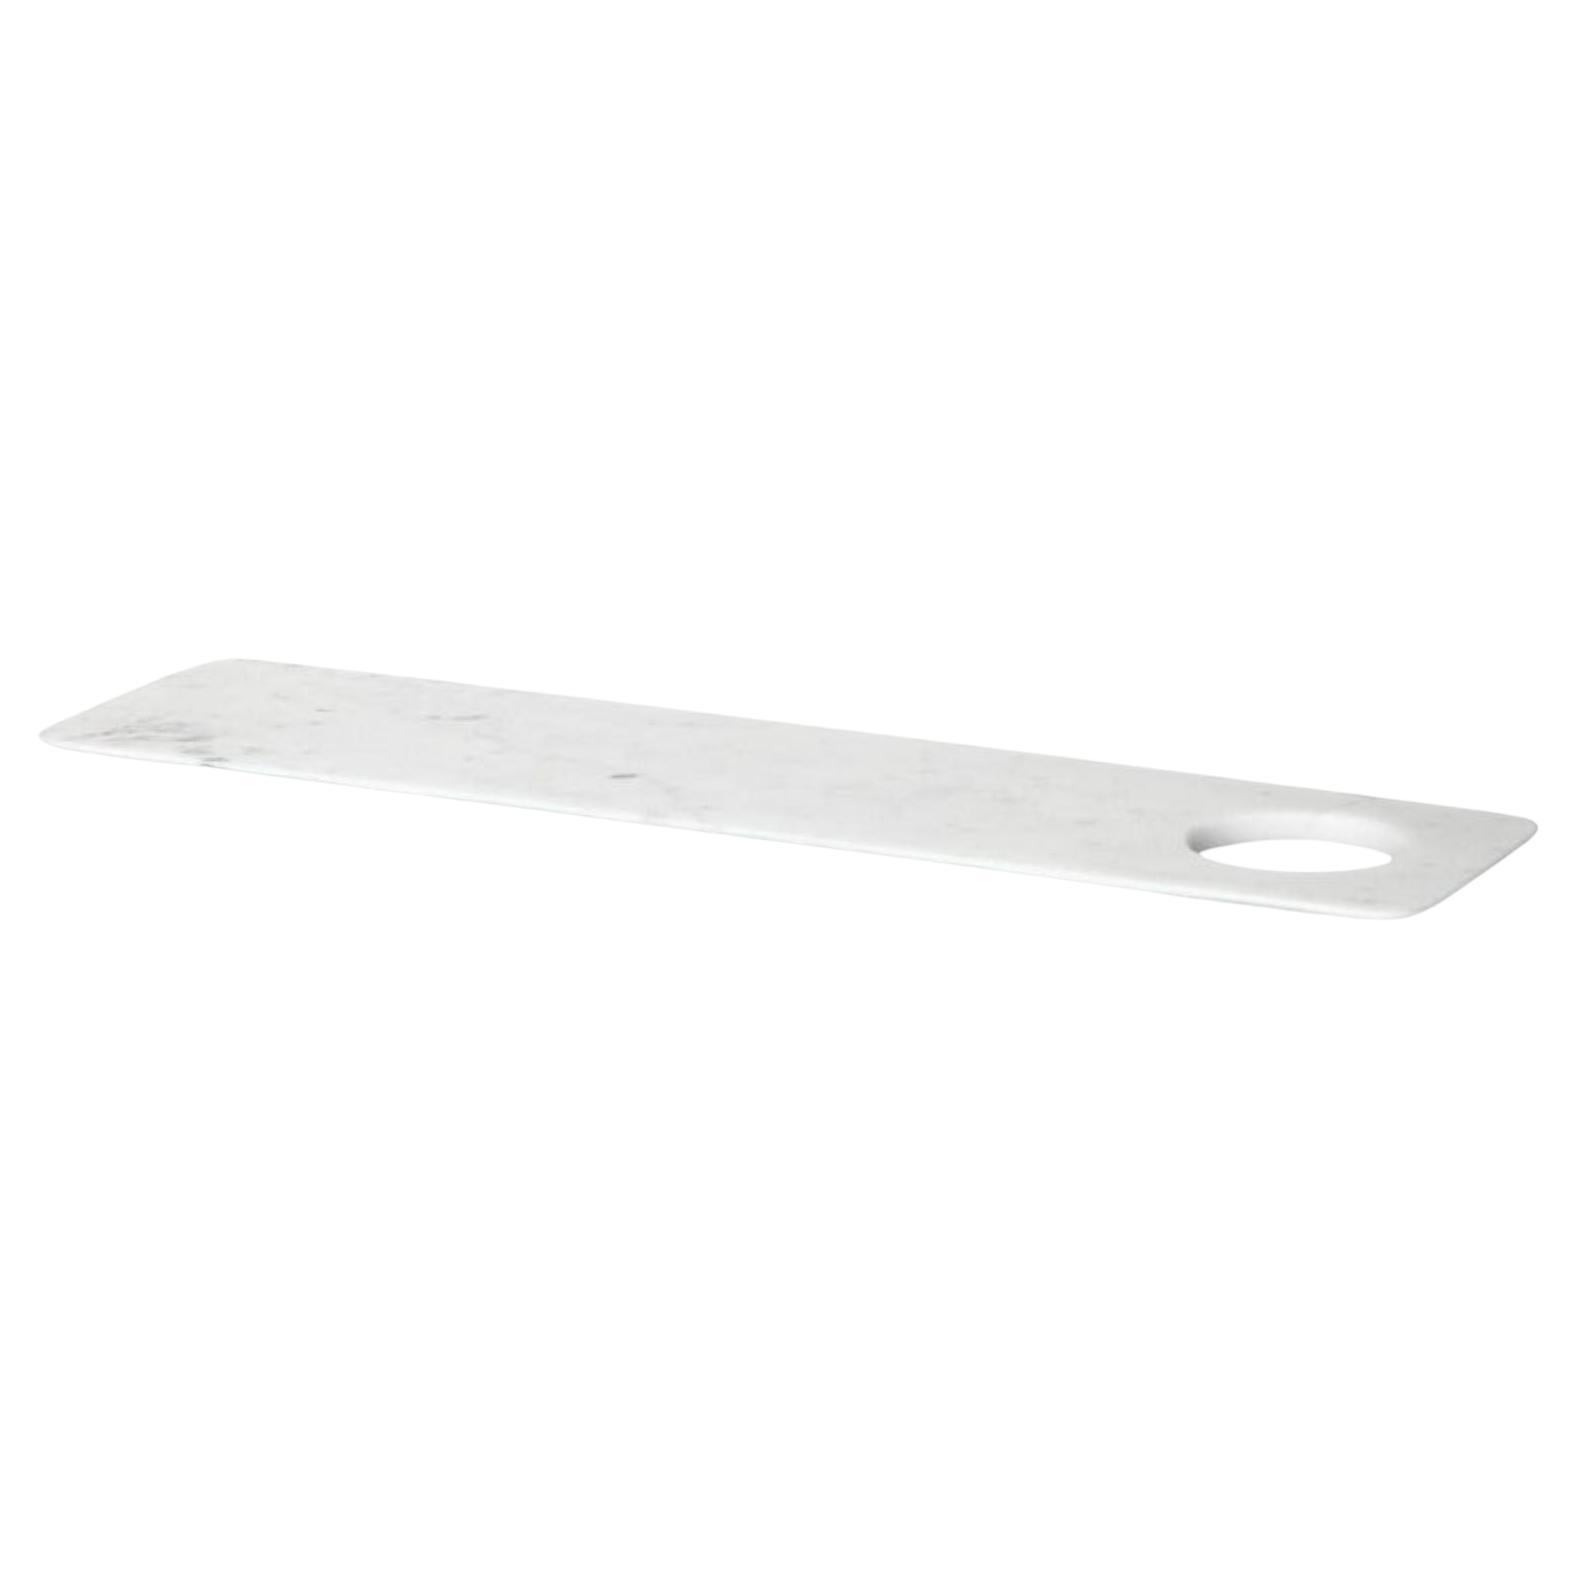 Paletta Tray/Chopping Board by Studioformart For Sale